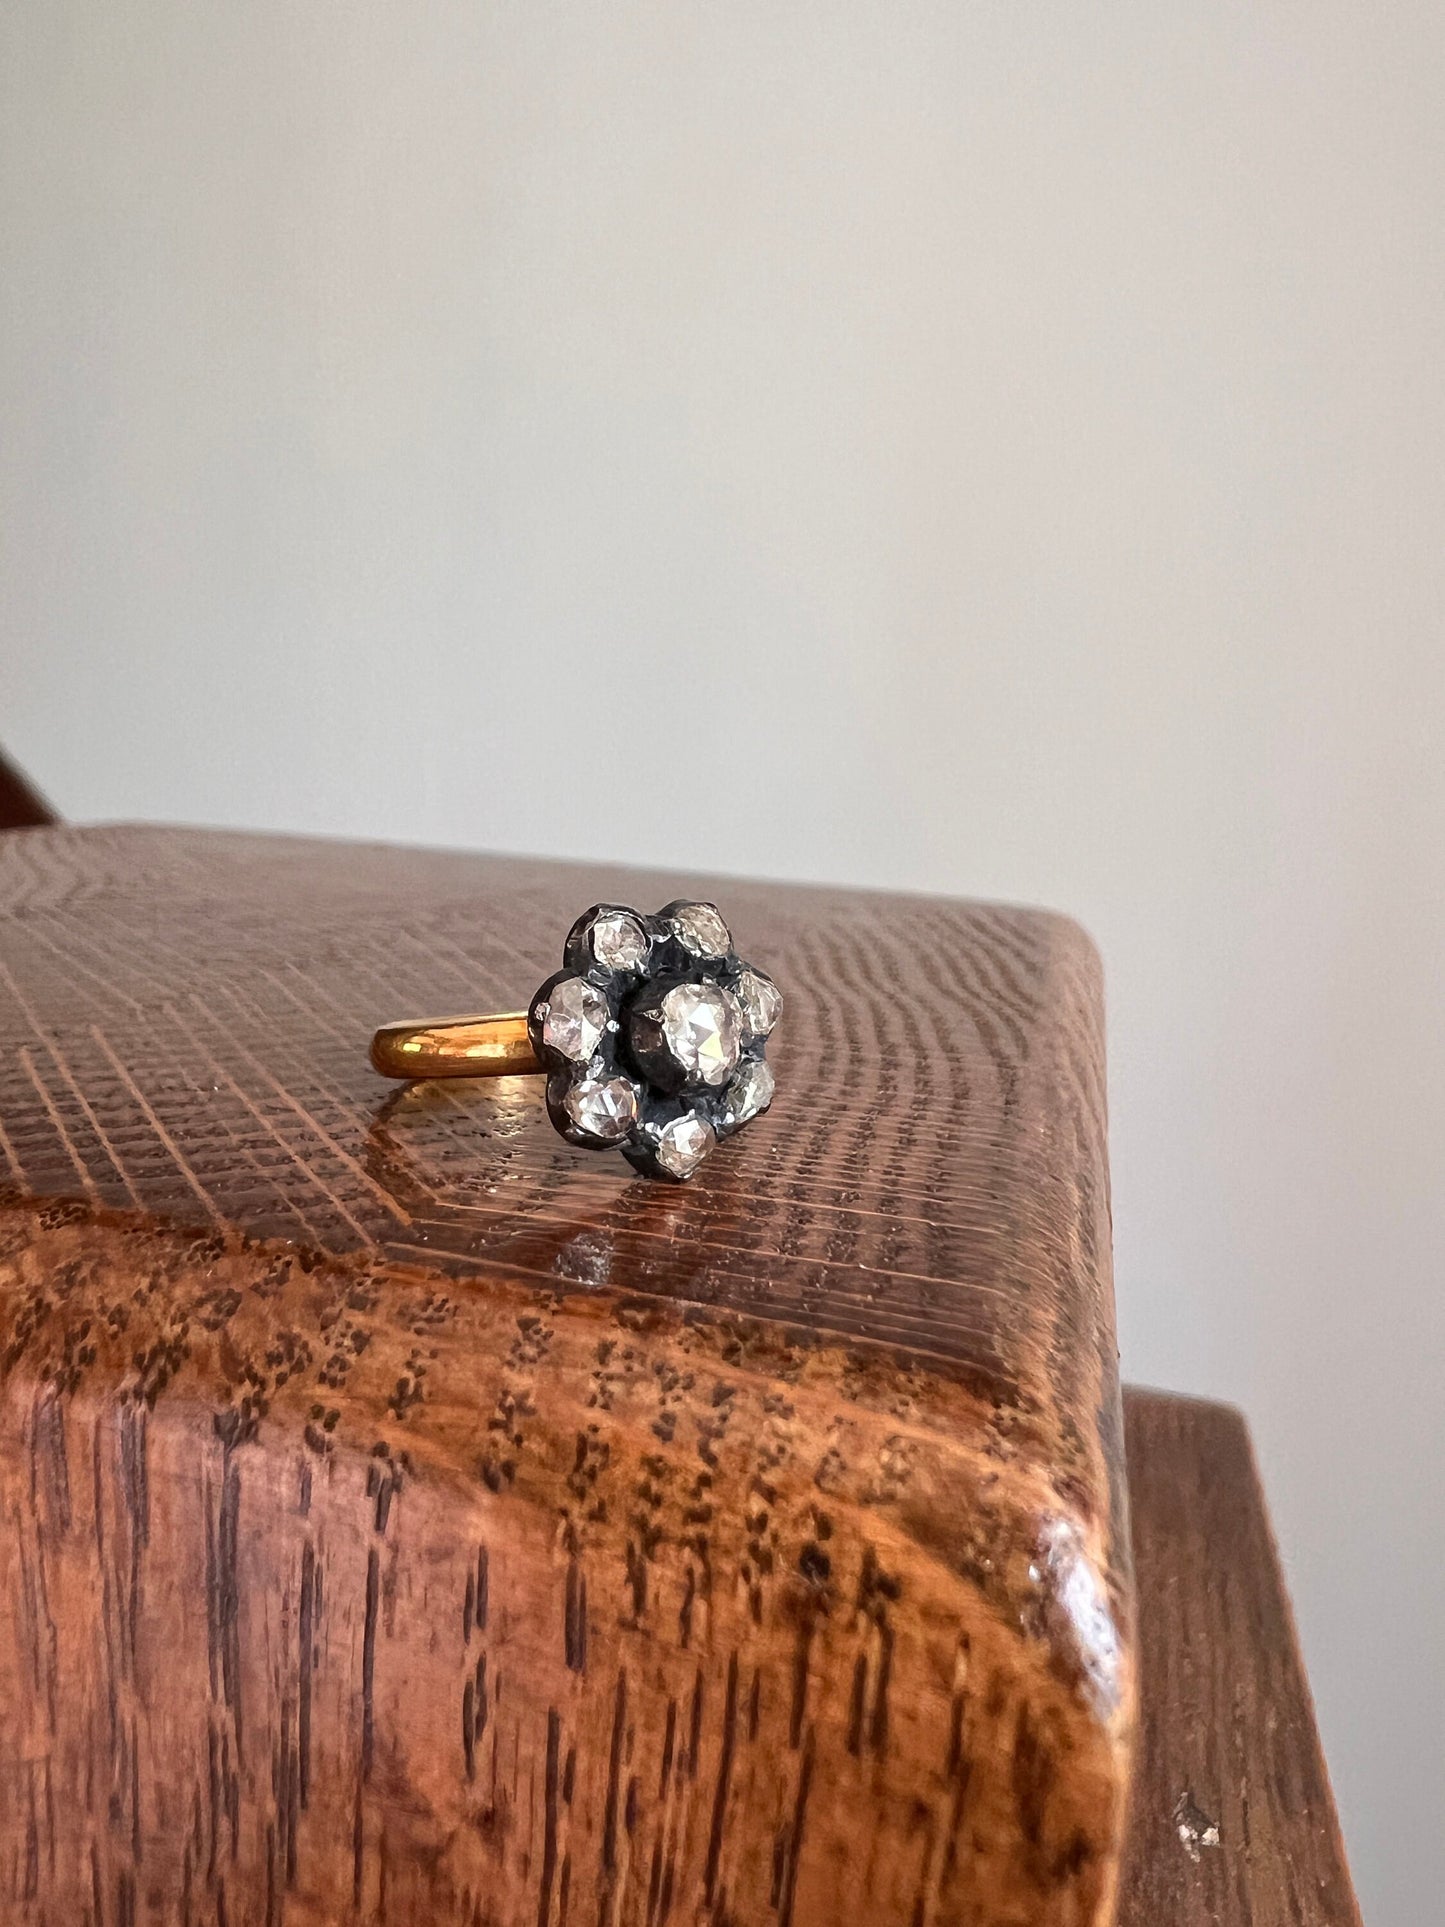 Antique Old Rose Cut DiAMOND Daisy Cluster Ring 23k GOLD Buttery Romantic Gift Stacker Georgian Victorian Not 18k 24k Silver Collet Foiled